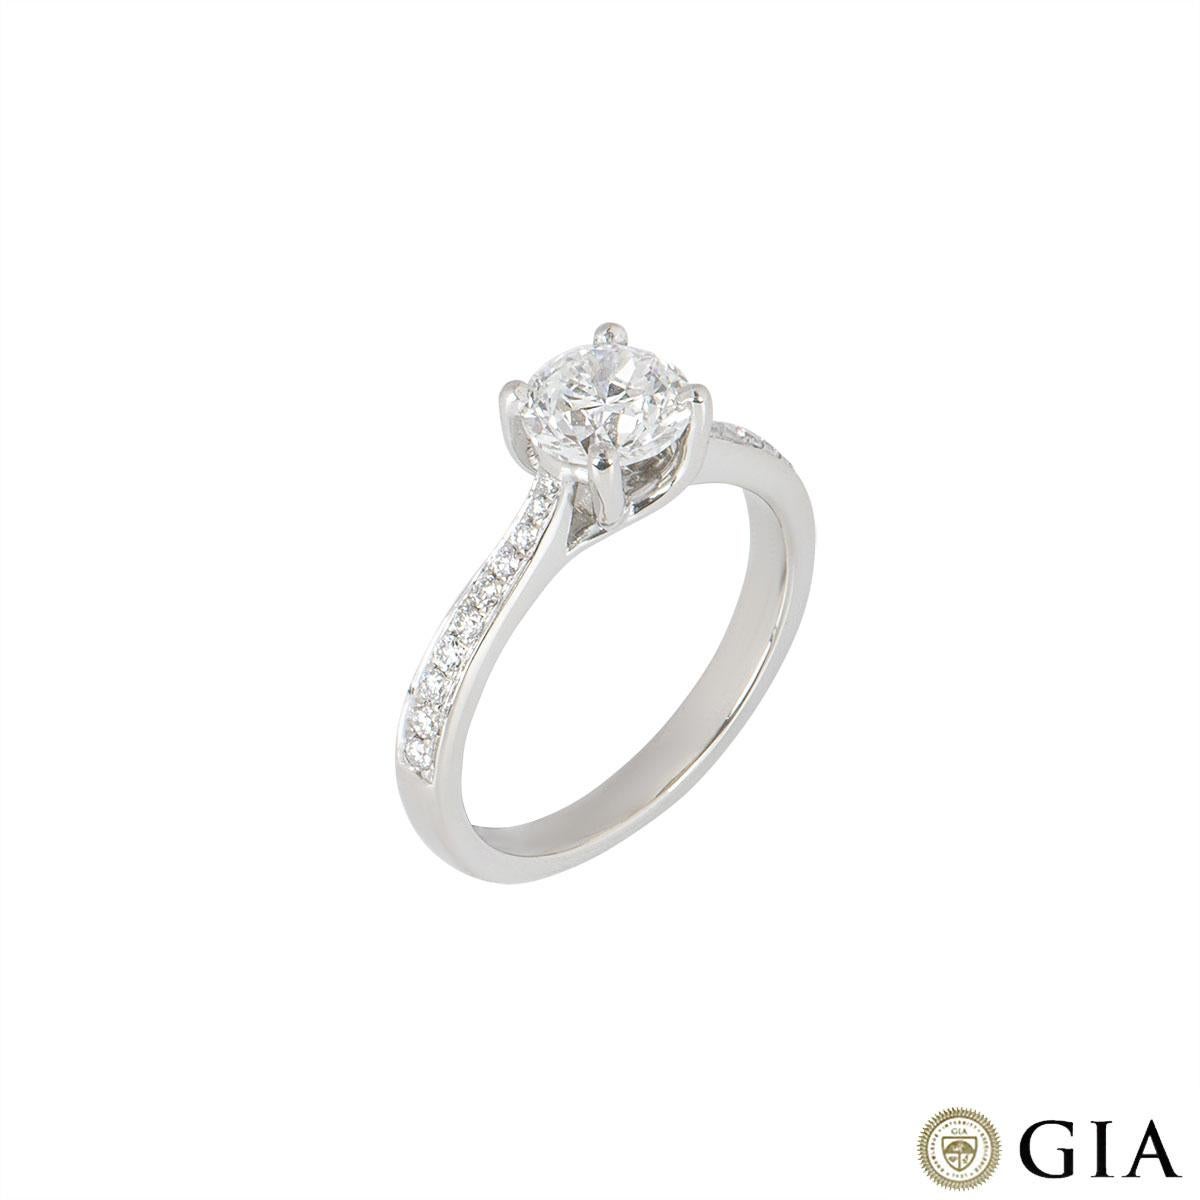 GIA Certified Laings Platinum Diamond Solitaire Engagement Ring 1.02 Carat In Excellent Condition For Sale In London, GB